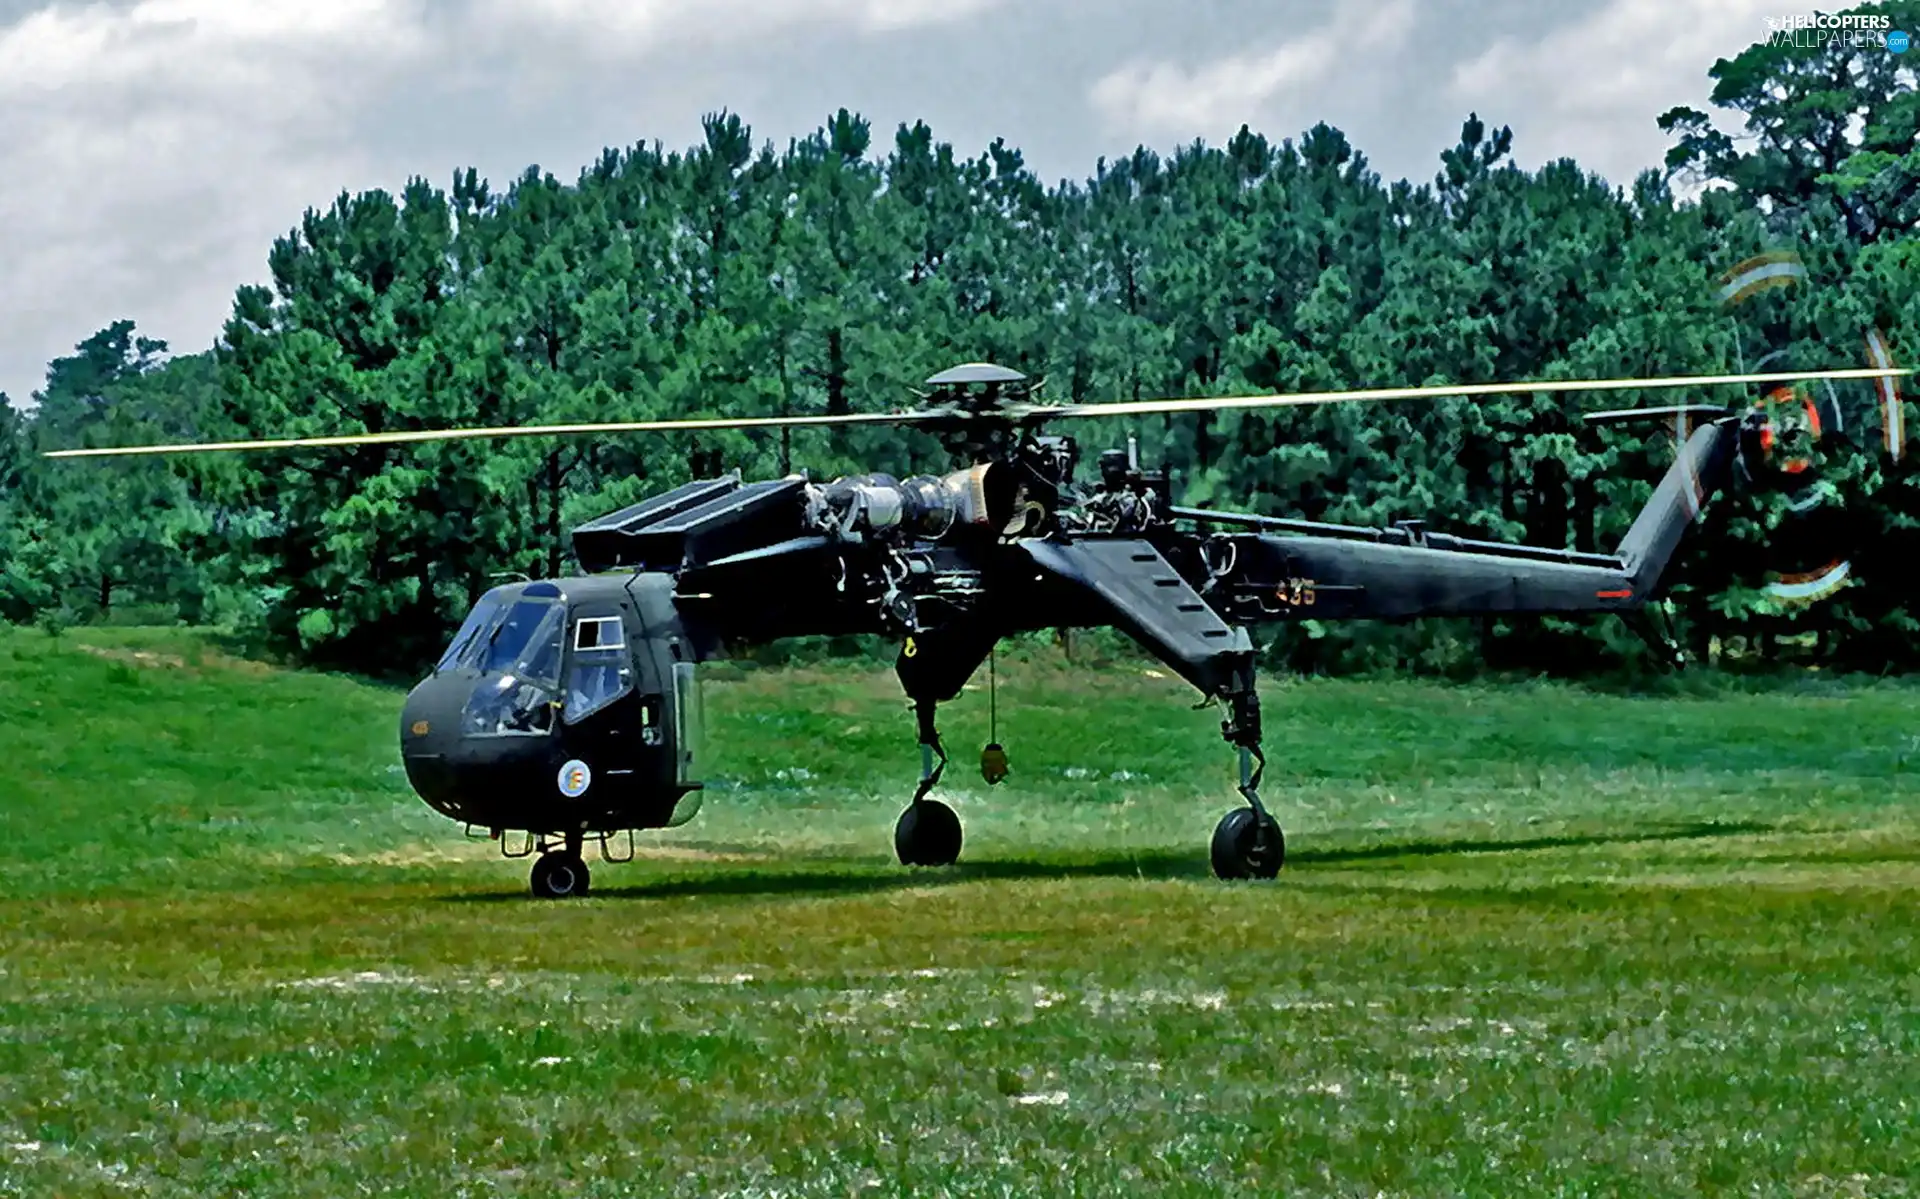 Helicopter, Sikorsky CH-54 Tarhe, carrying